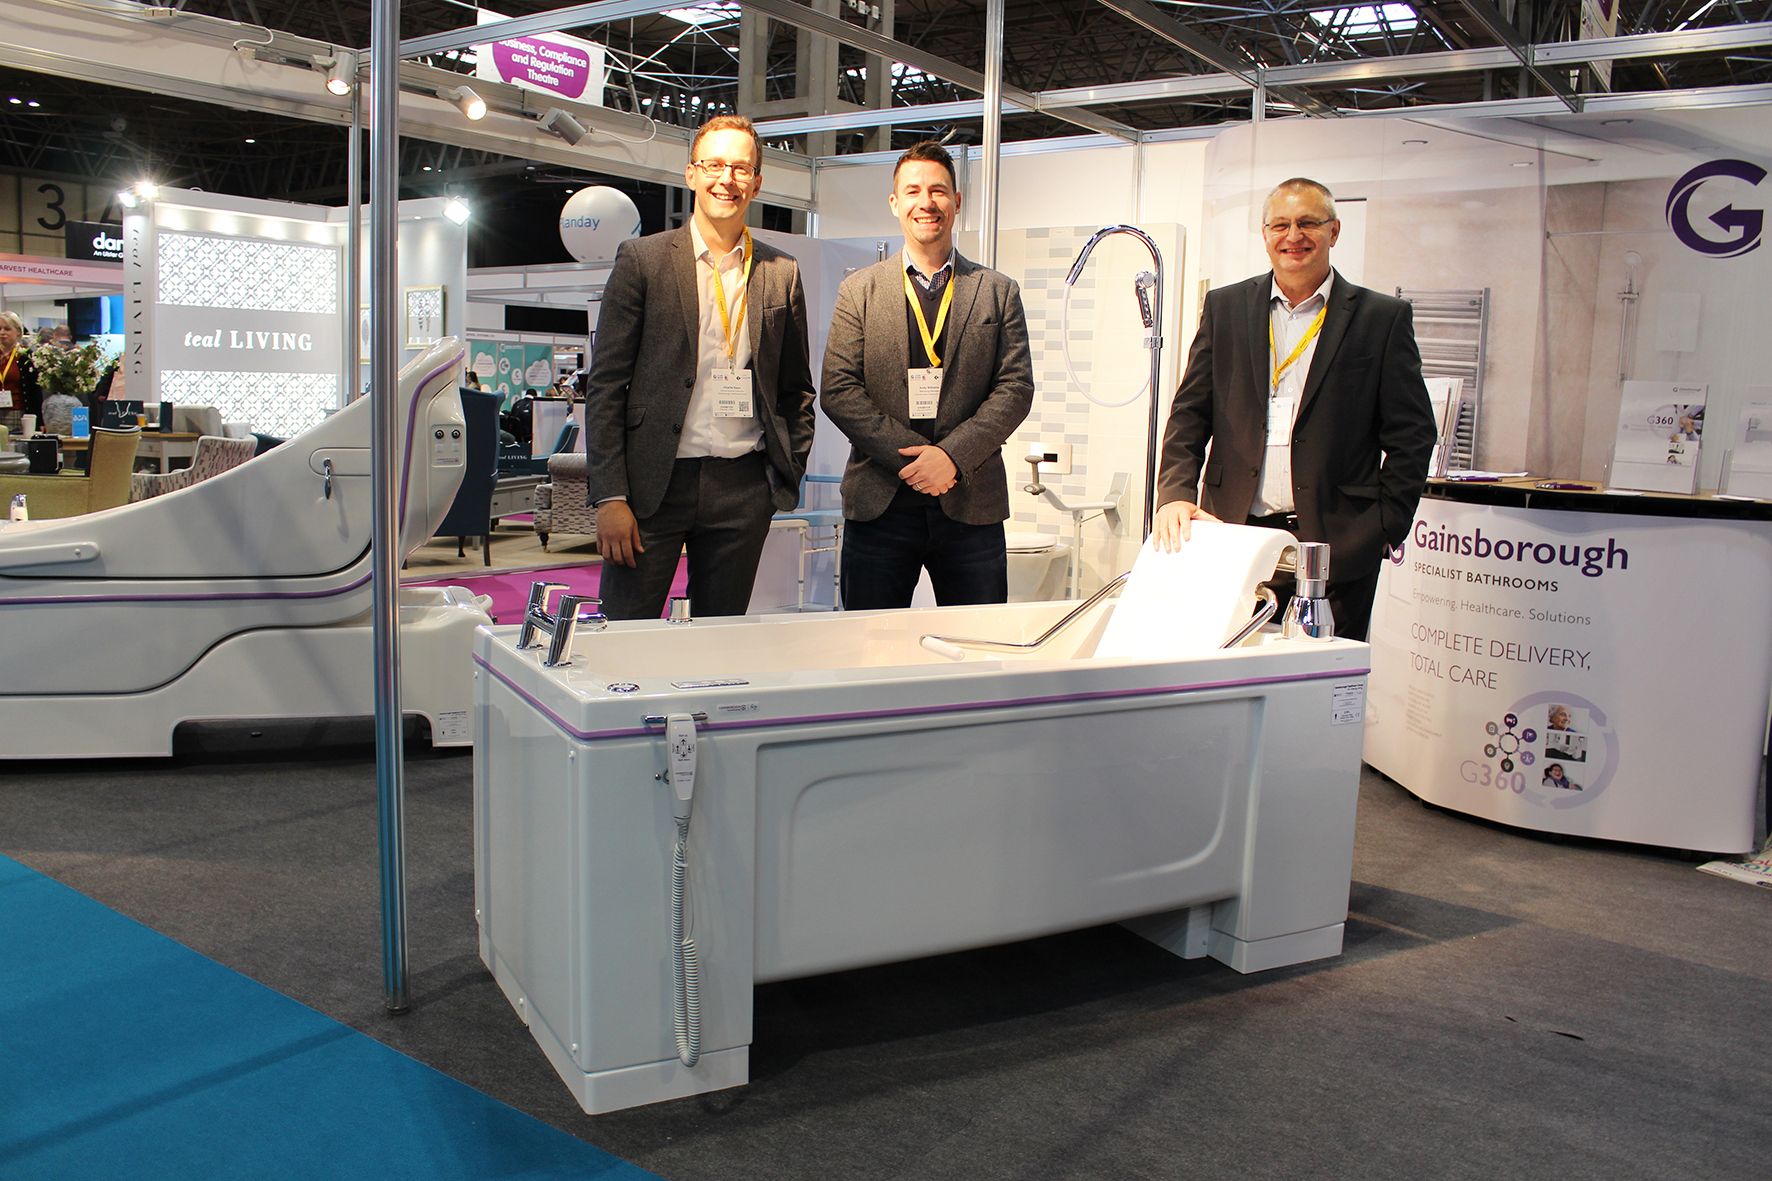 Gainsborough Specialist Bathrooms to deliver unparalleled holistic showcase at Care Show 2021